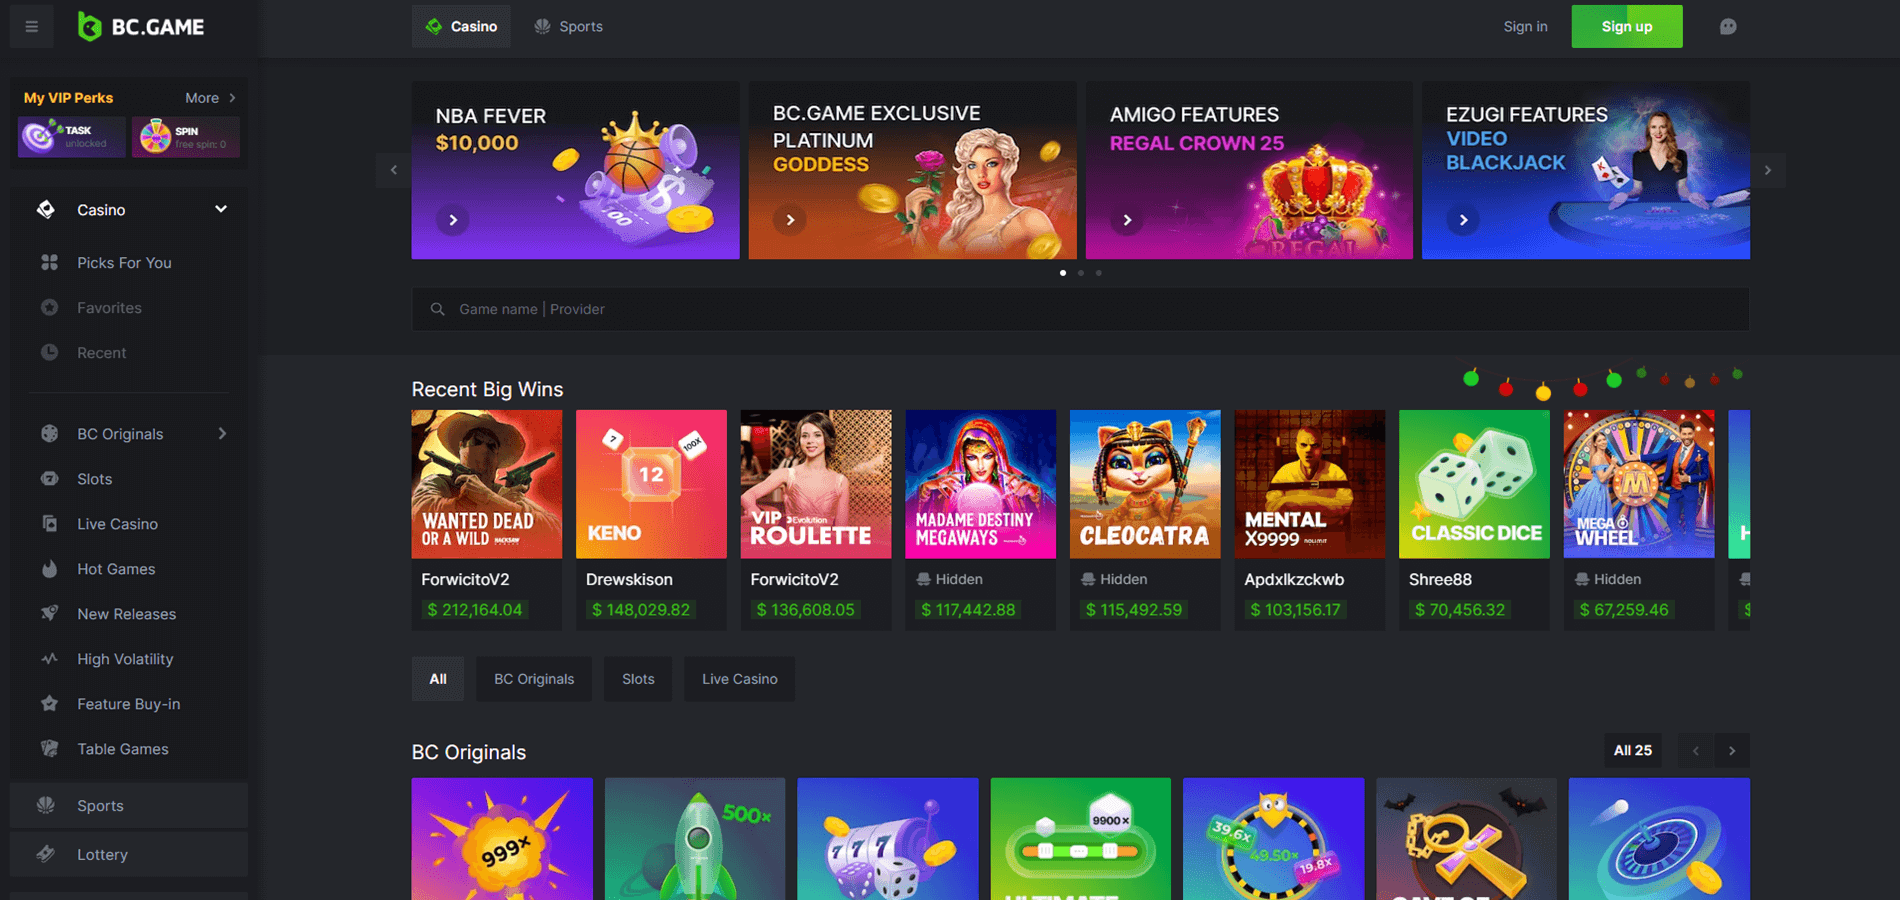 The #1 BC.Game Casino in Bangladesh Mistake, Plus 7 More Lessons